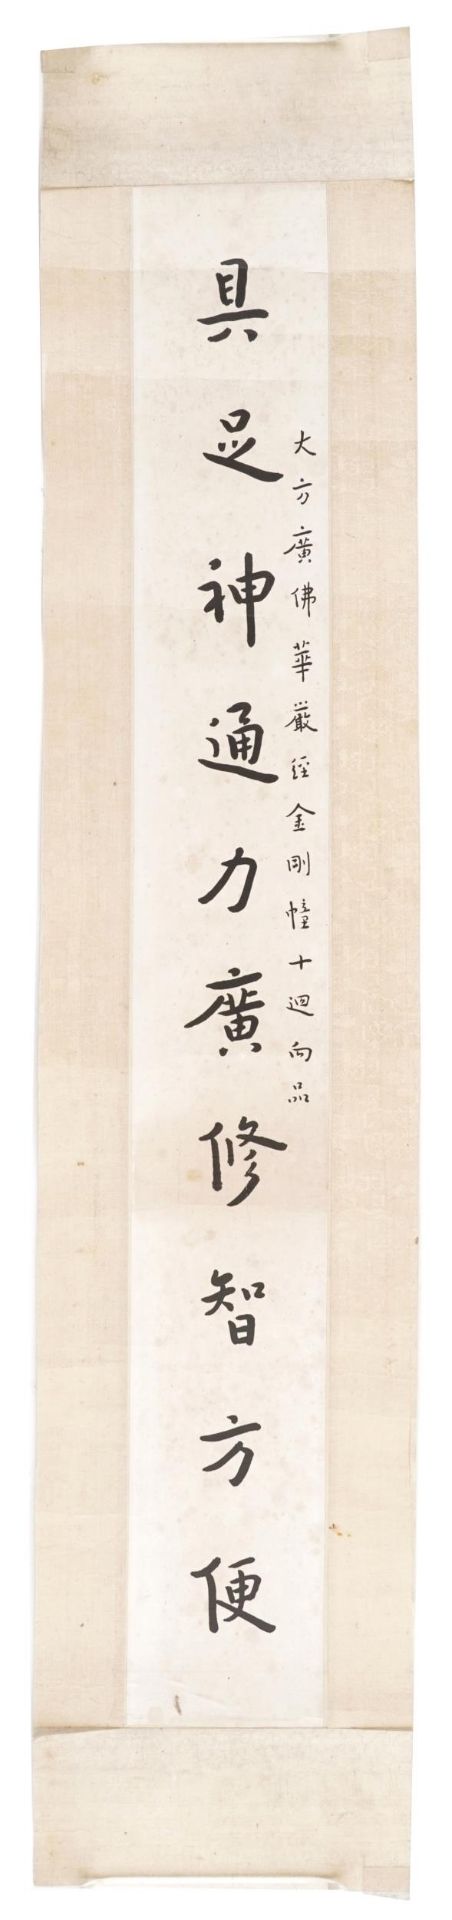 Calligraphy, pair of Chinese ink scrolls signed with red seal marks, mounted, unframed, each 60cm - Image 3 of 7